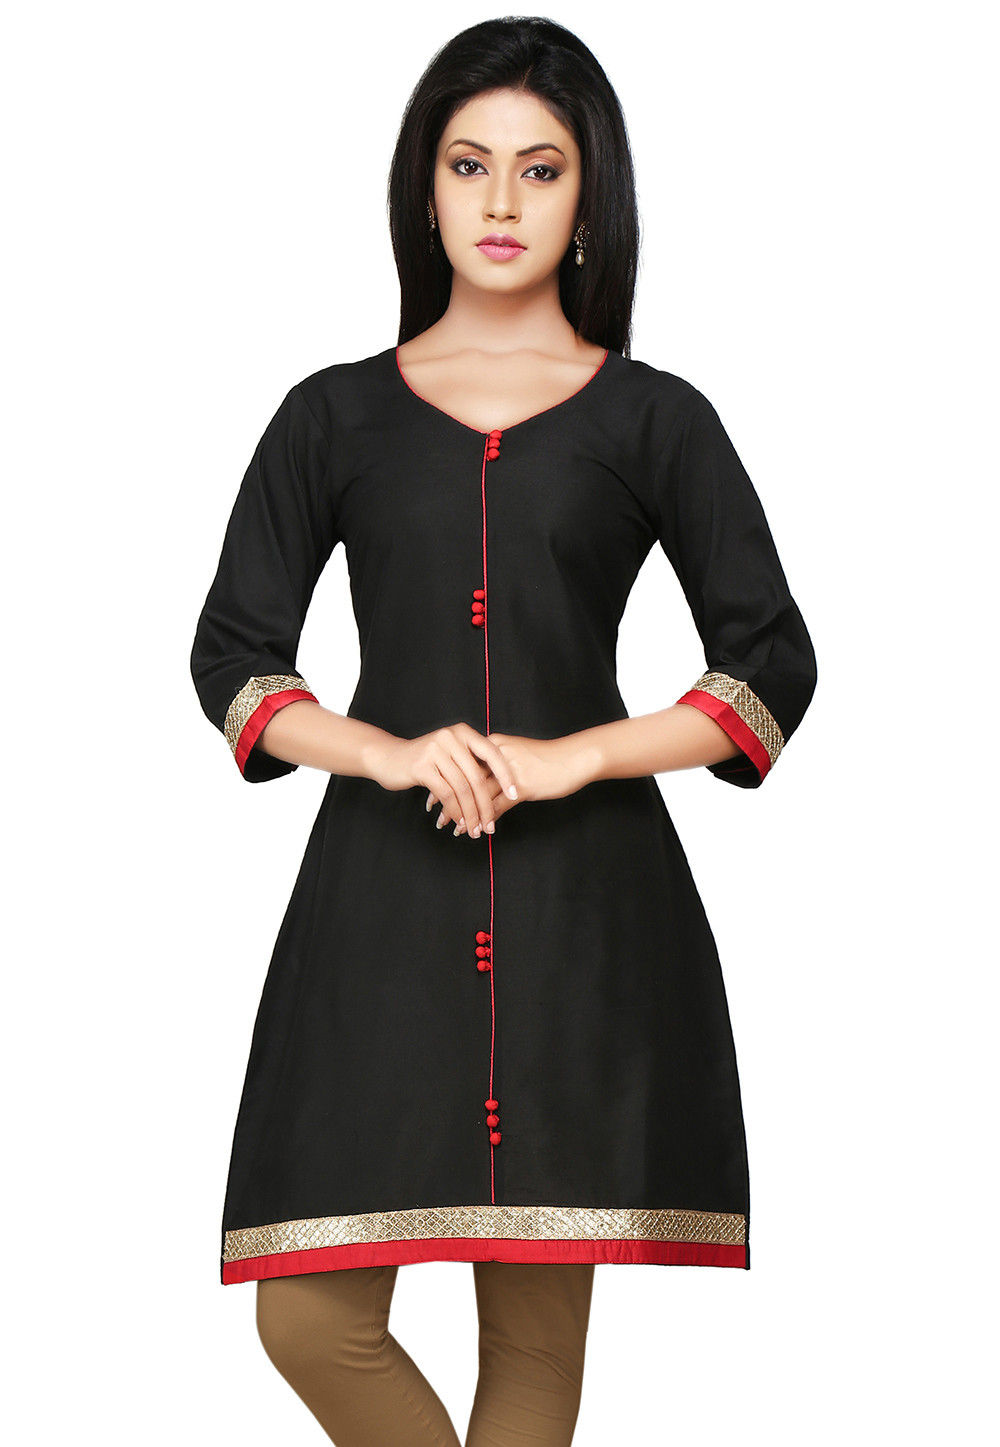 LASTINCH All Size's Solid Black Kurti with three fourth sleeves